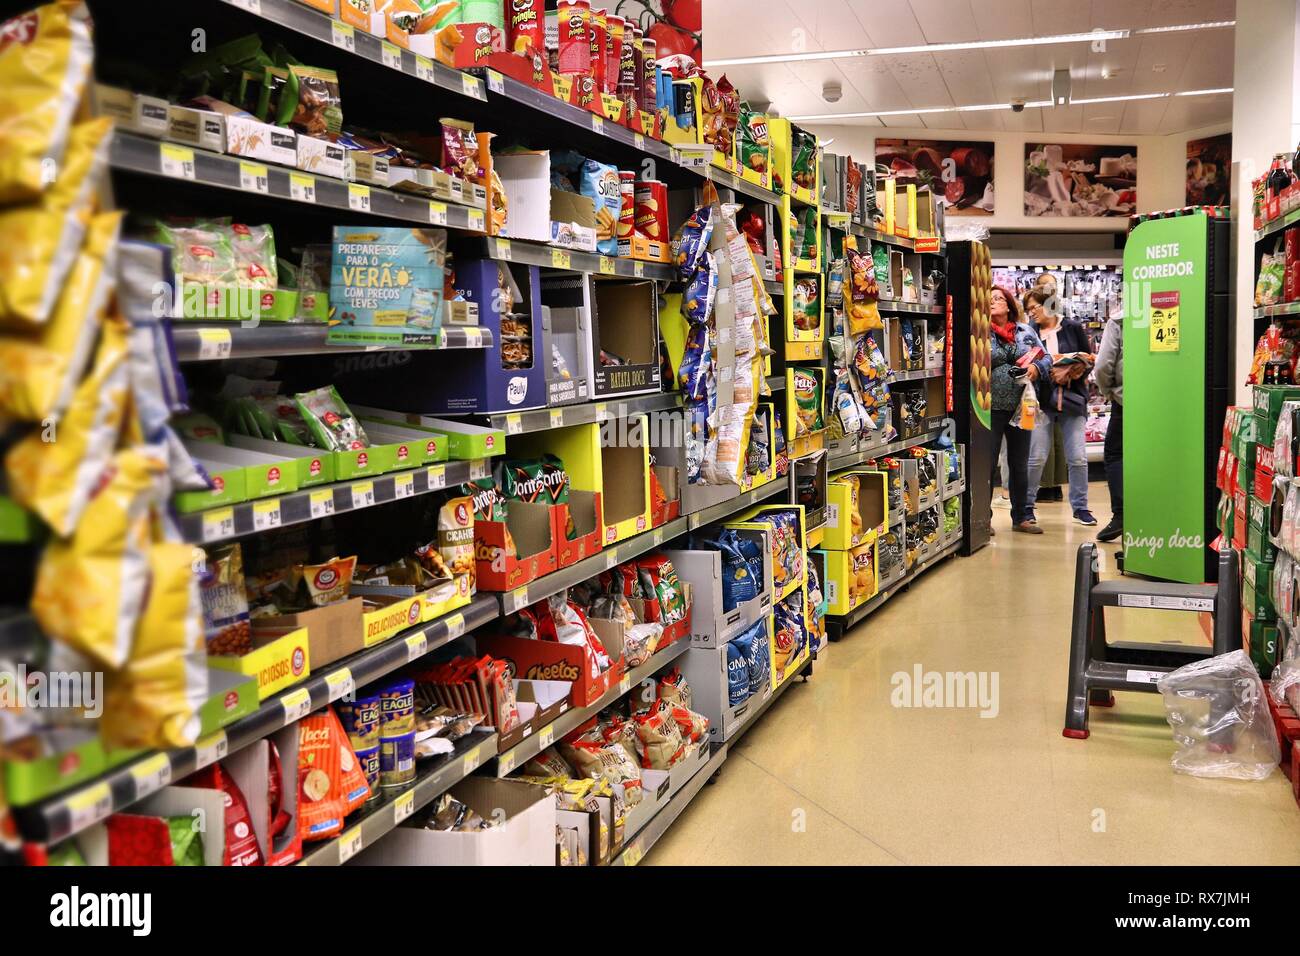 LISBON, PORTUGAL - JUNE 4, 2018: Supermarket products in Lisbon. Annual consumer spending in Portugal amounts to 129 billion EUR. Stock Photo